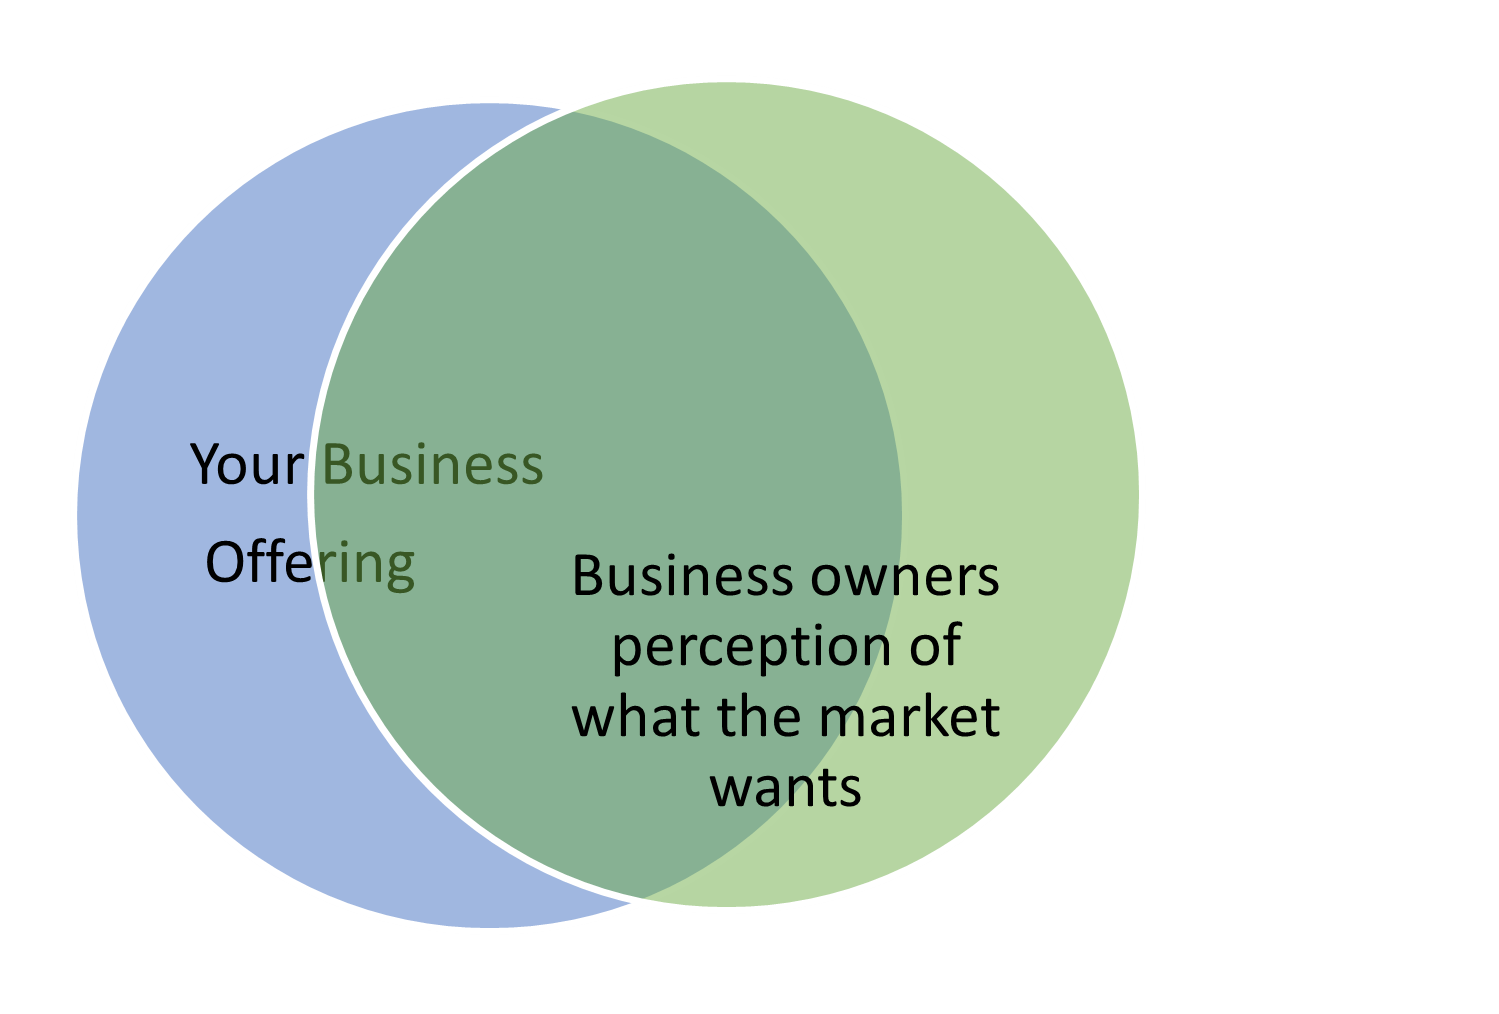 Business owners perception of what the market wants